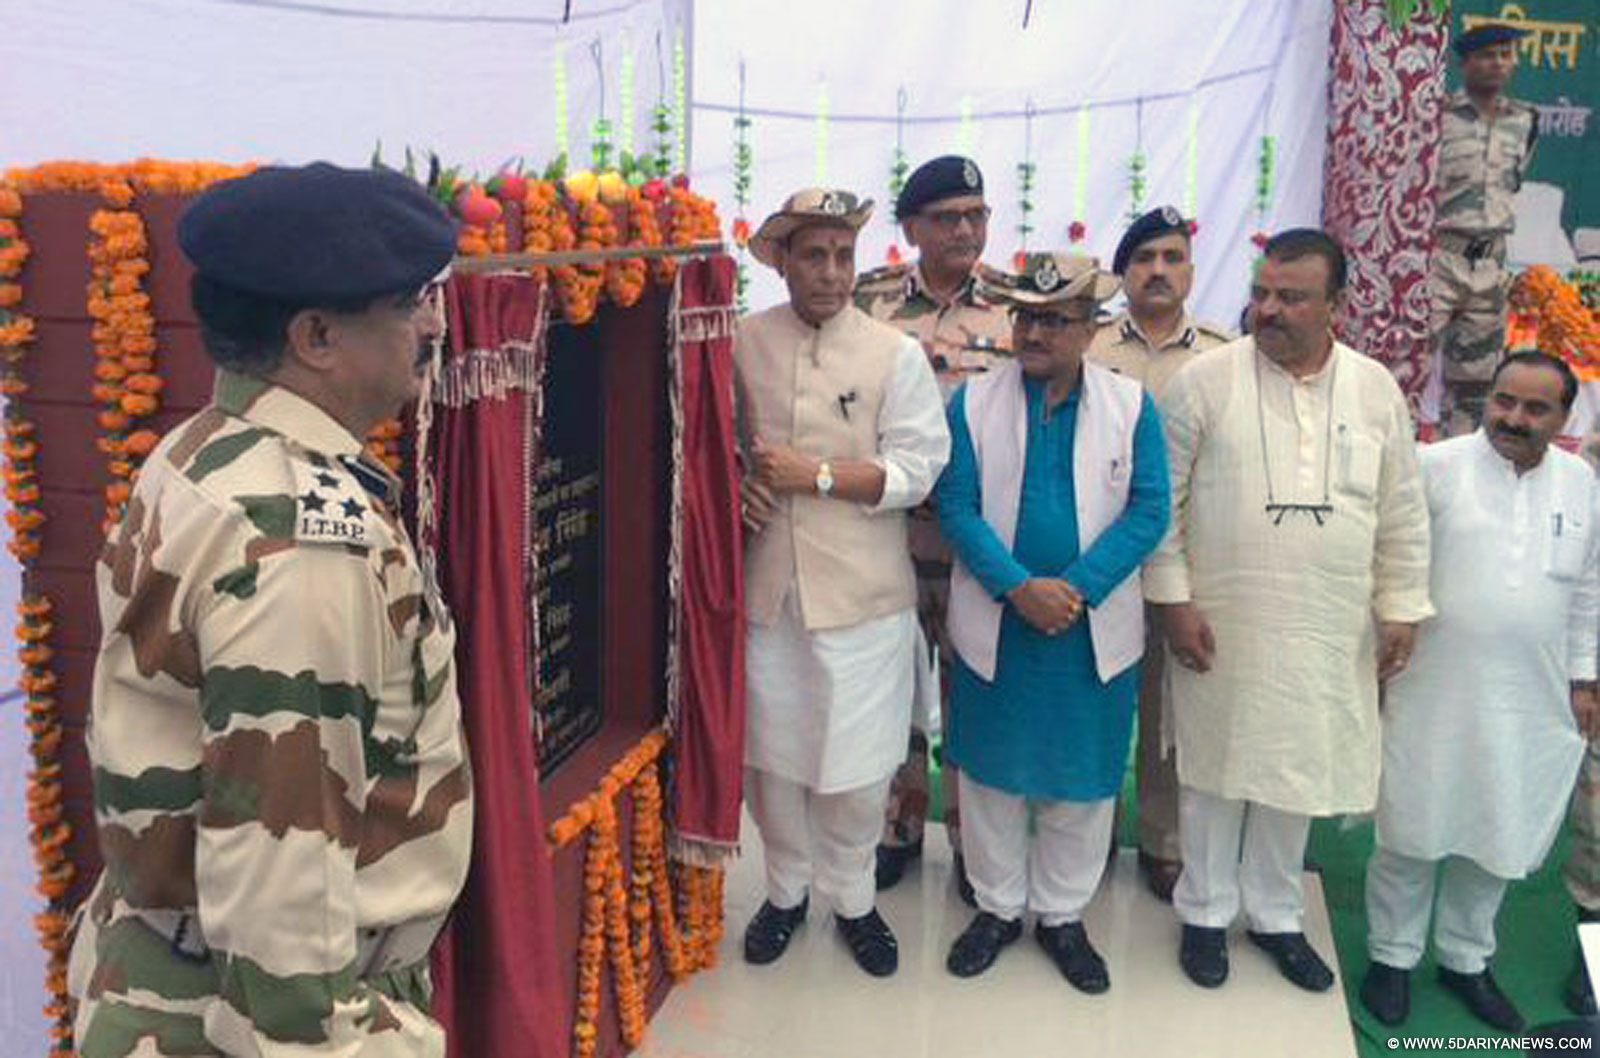 The Union Home Minister, Shri Rajnath Singh unveiling the plaque to inaugurate the newly constructed building, at ITBP Camp, in Samba sector, Jammu and Kashmir on September 21, 2015. The Deputy Chief Minister of Jammu and Kashmir, Dr. Nirmal Kumar Singh is also seen.